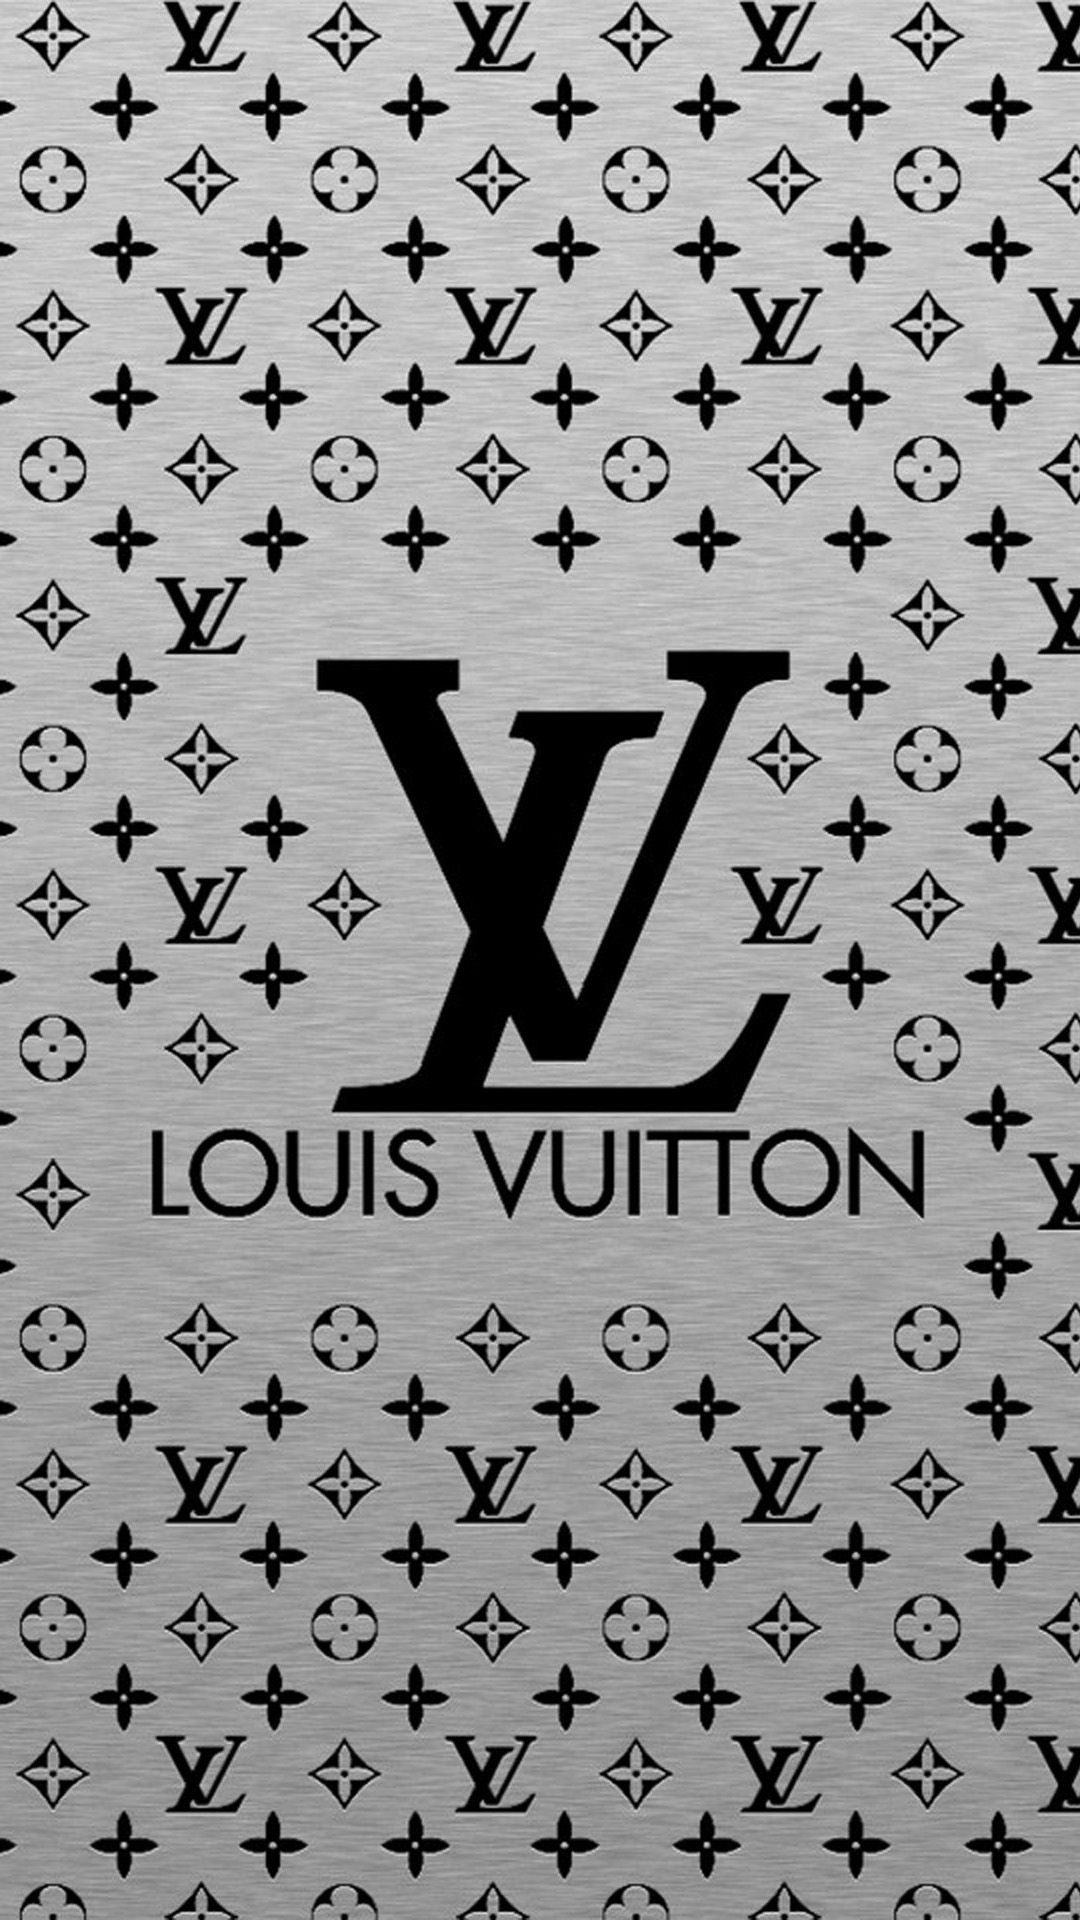 10 Louis Vuitton HD Wallpapers and Backgrounds